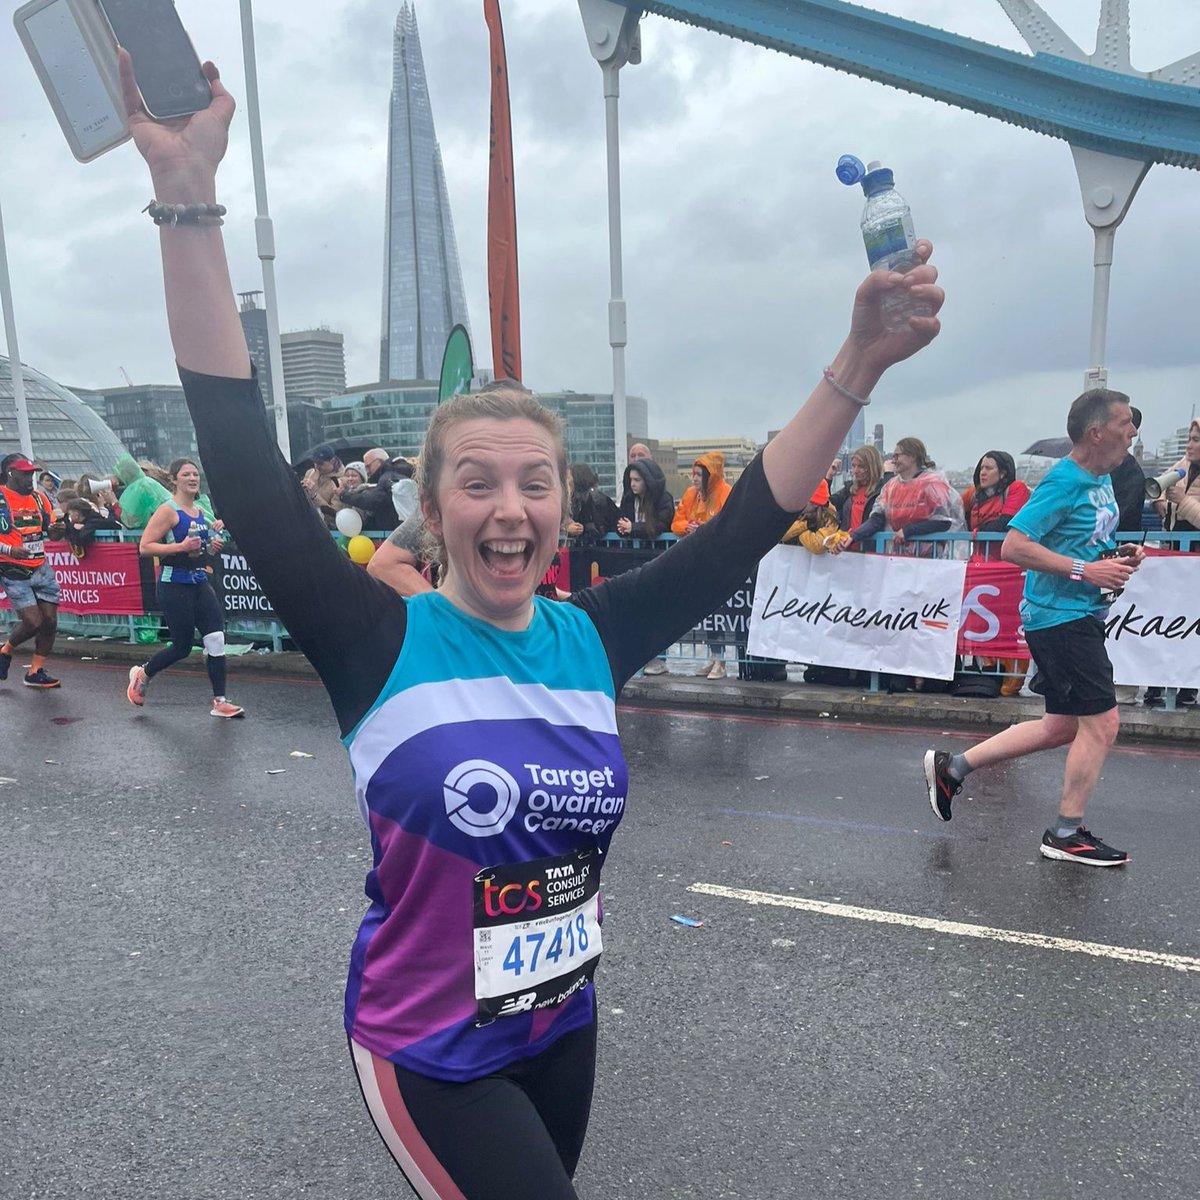 It's @LondonMarathon day! 🏃🏅 Today, 17 incredible Team Target runners will be taking to the streets. It's time for all the hard work and training to pay off, so lace up your trainers with pride and know we're behind you every step of the way! 💜 Share a good luck message 👇